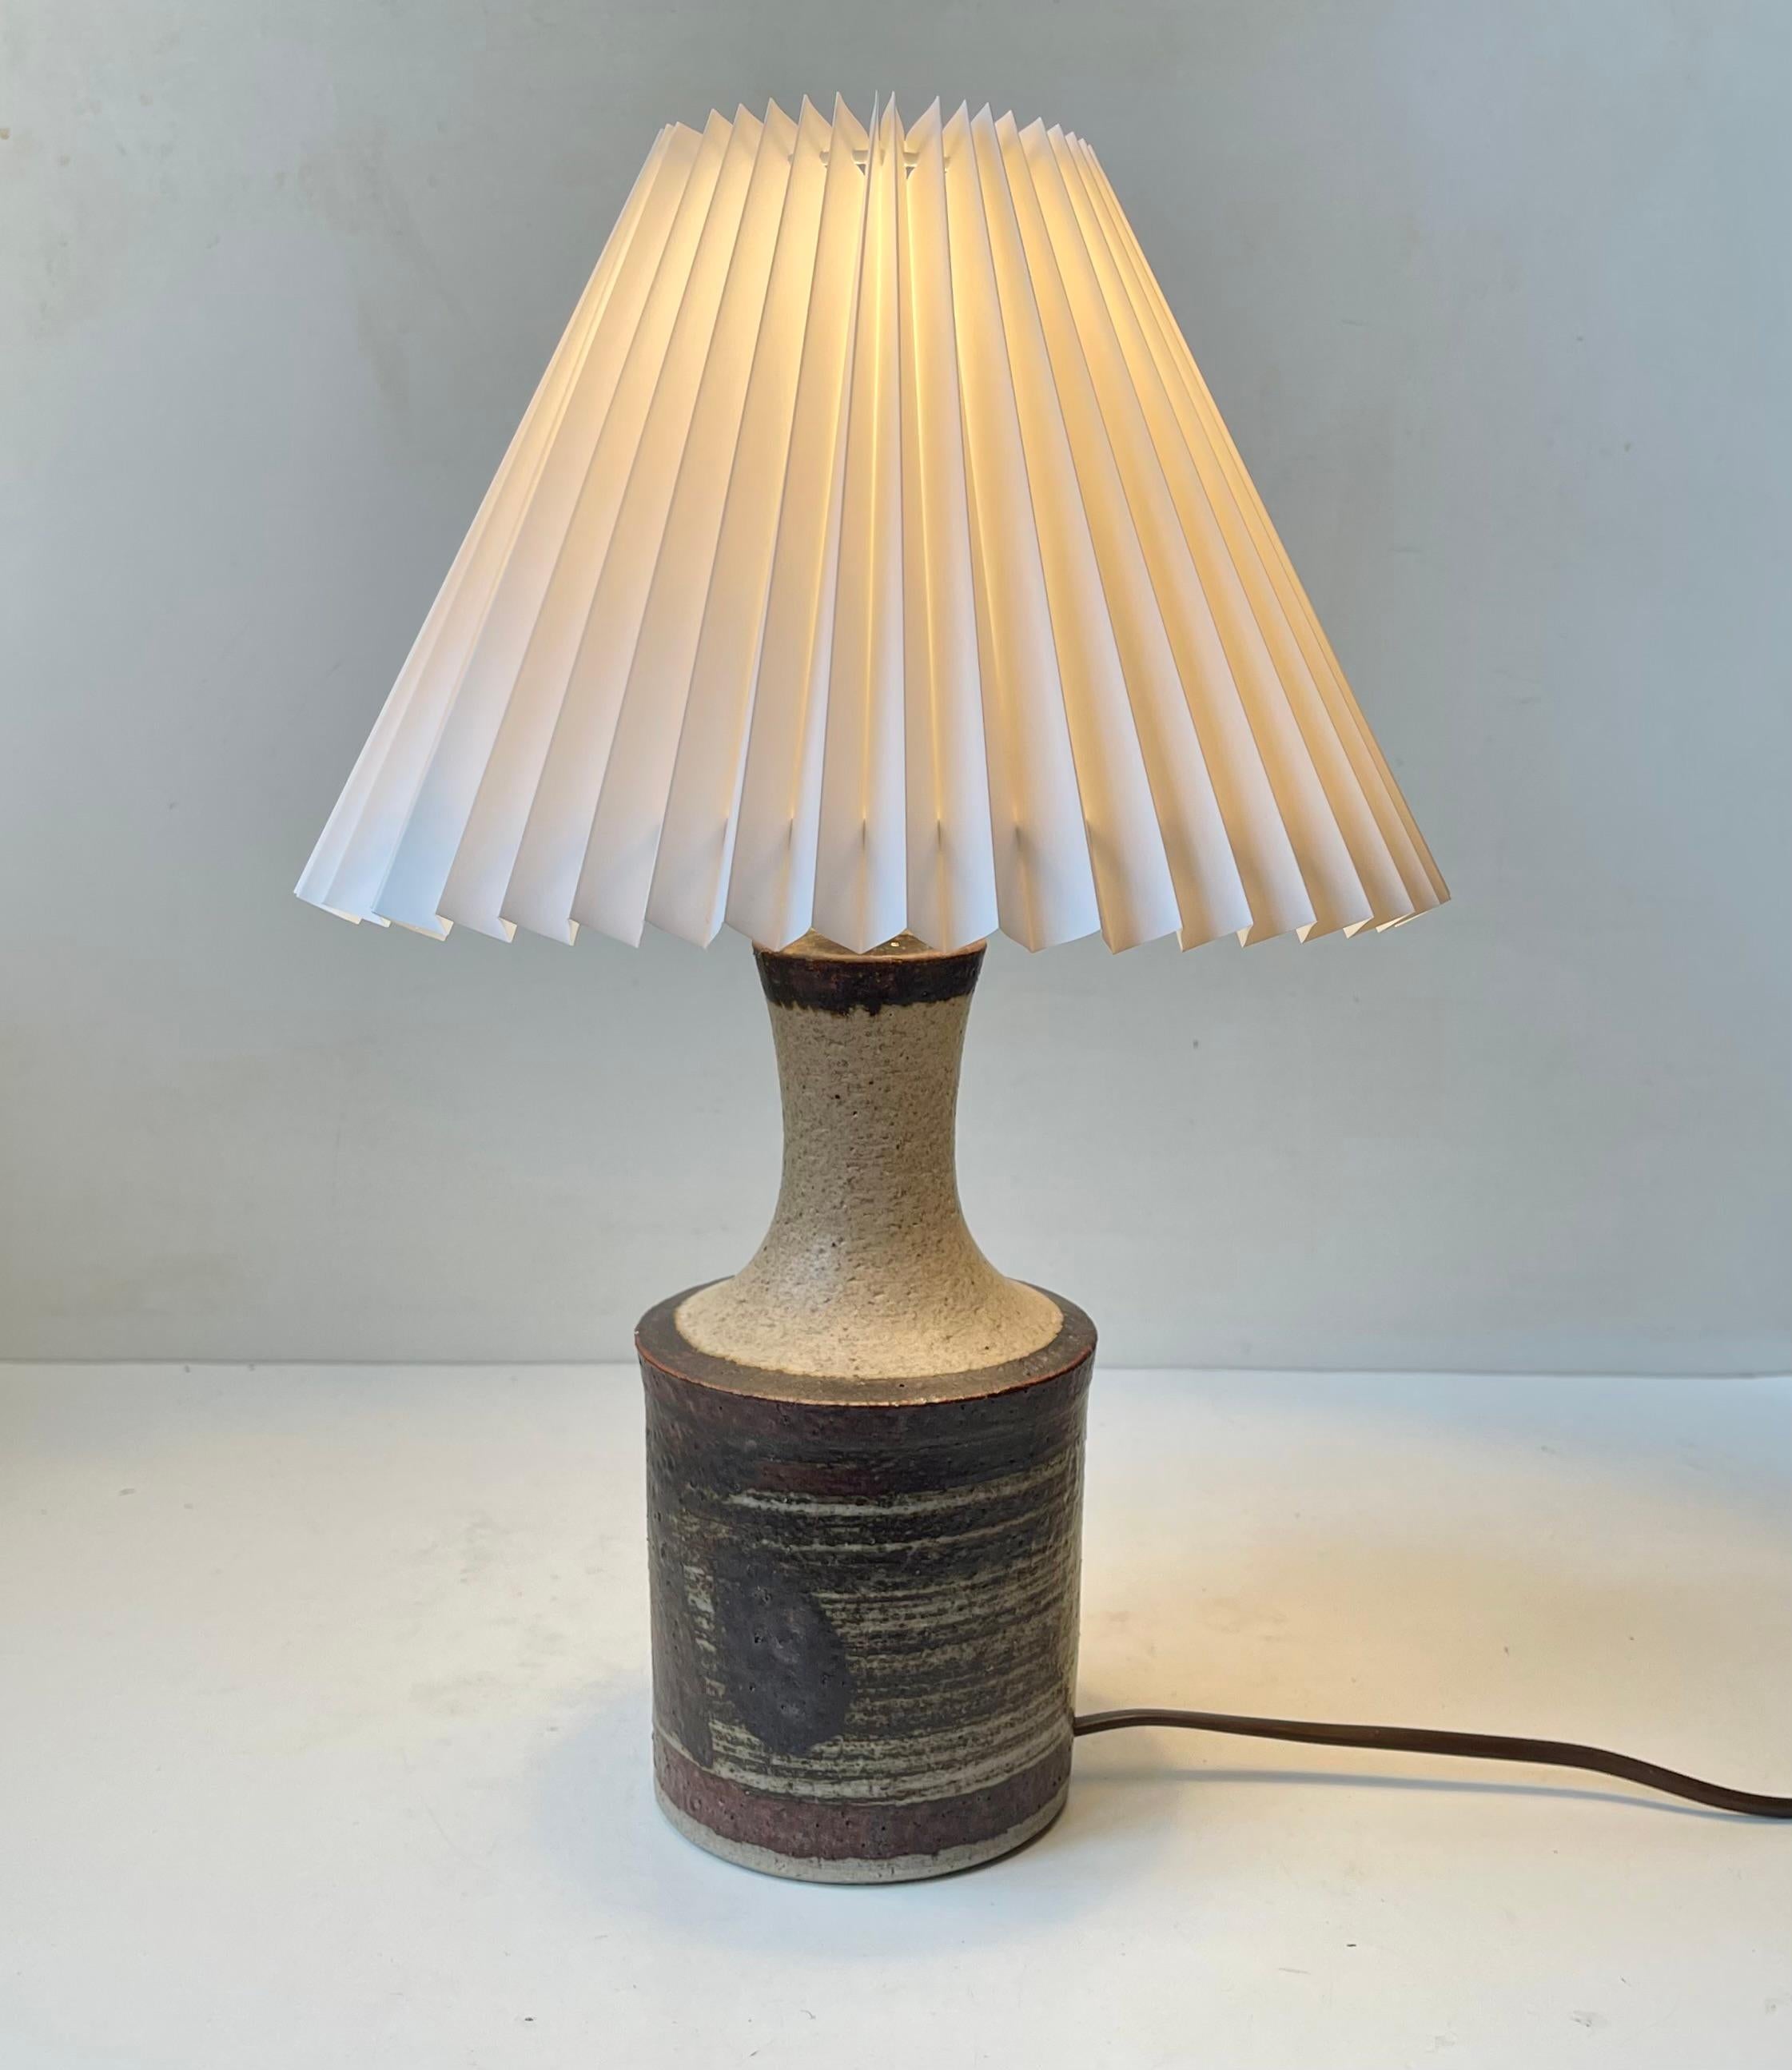 Danish Modern Glazed Stoneware Table Lamp by Axella Stentøj, 1970s In Good Condition For Sale In Esbjerg, DK